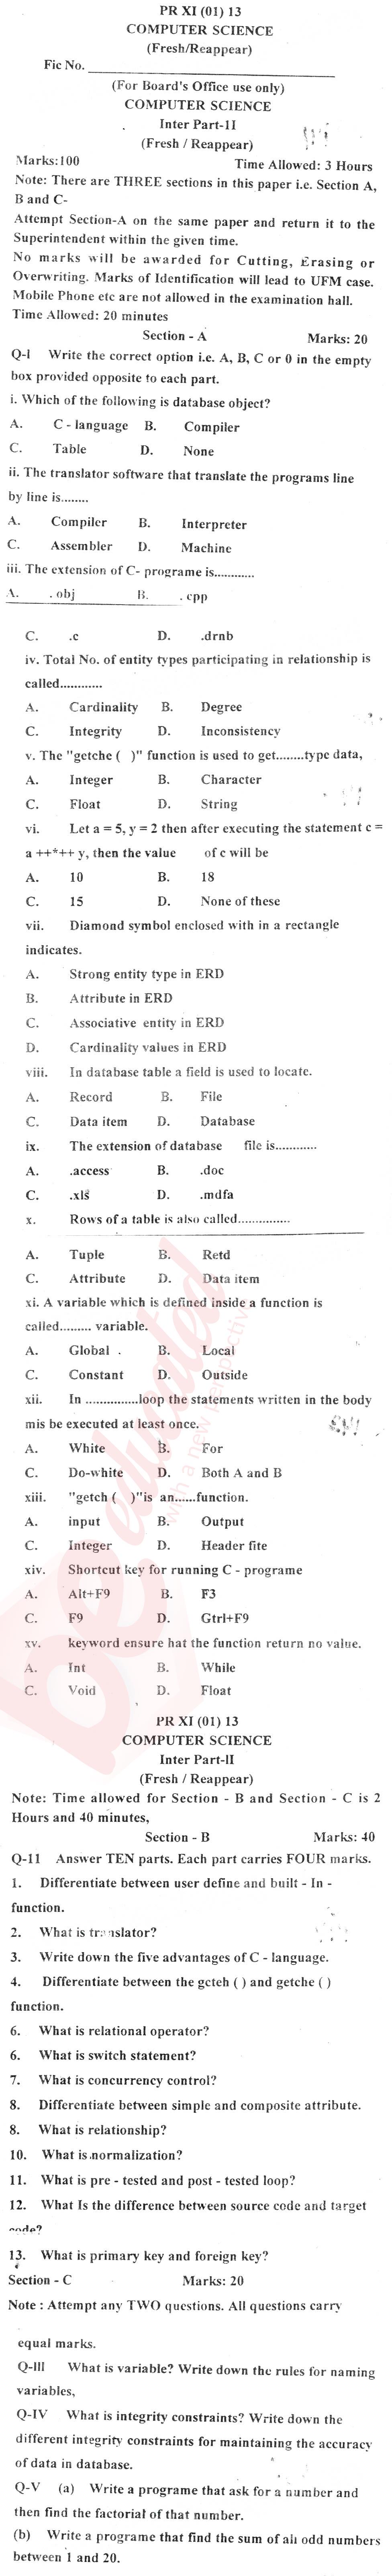 Computer Science ICS Part 2 Past Paper Group 1 BISE Malakand 2013